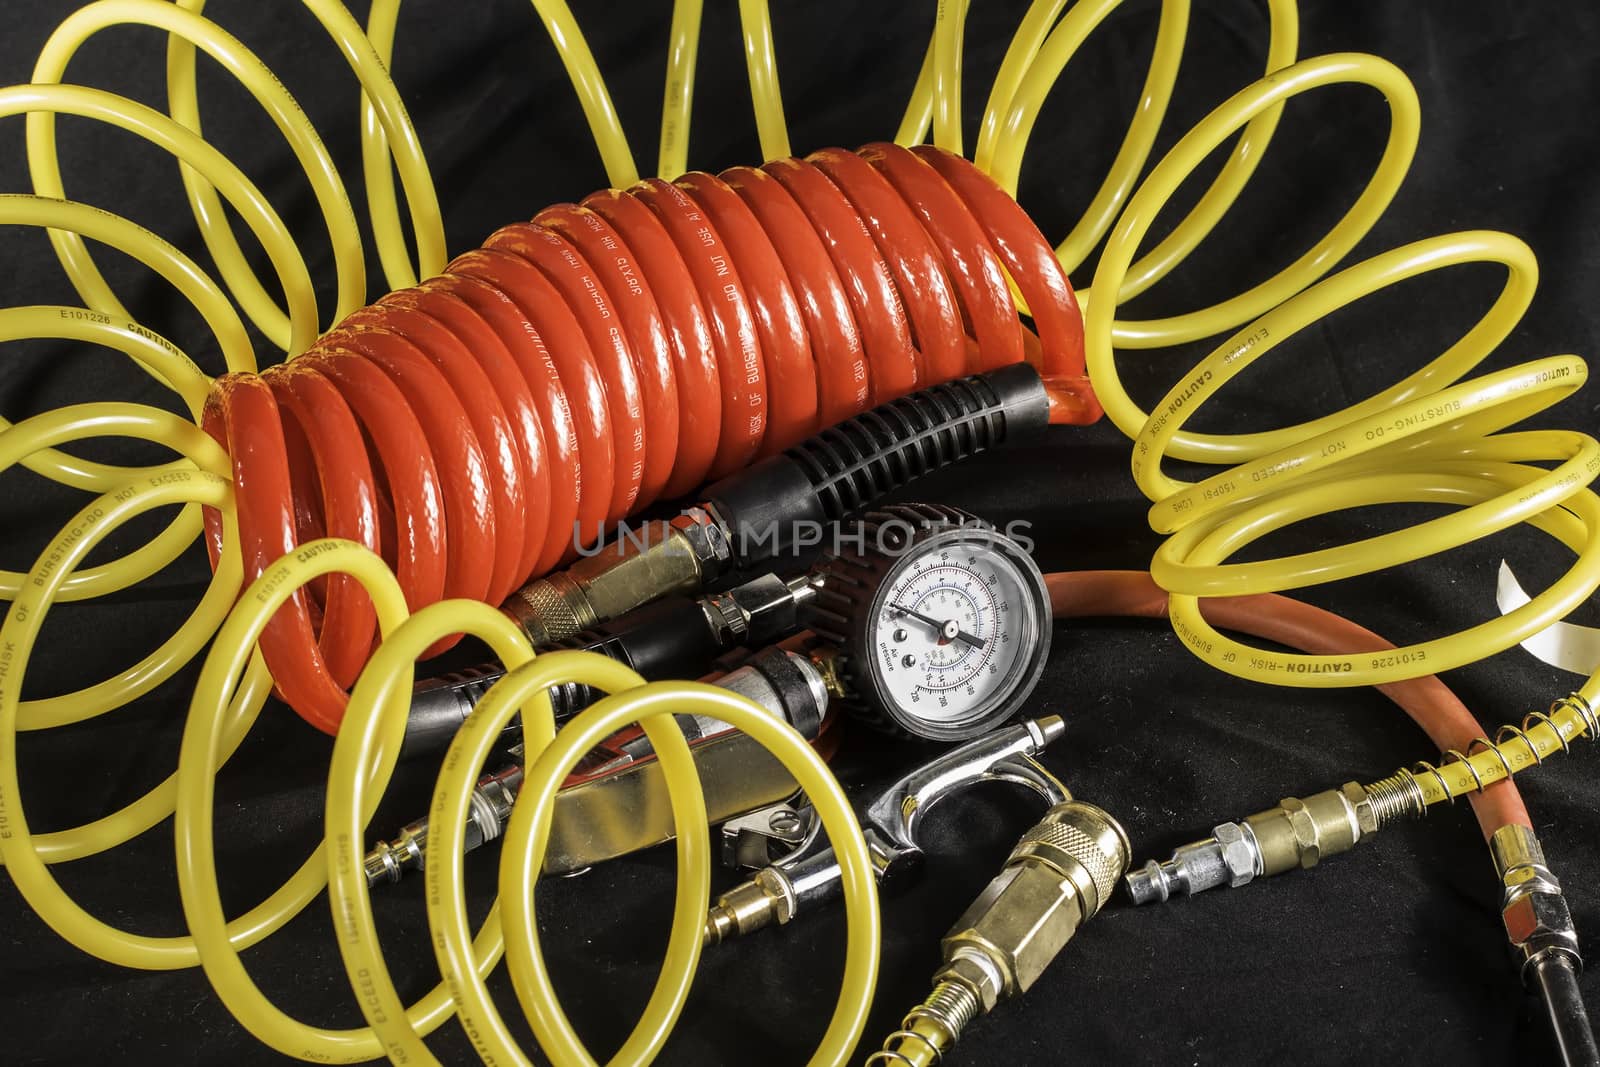 A shot of air hoses and air tools used with an air compressor.